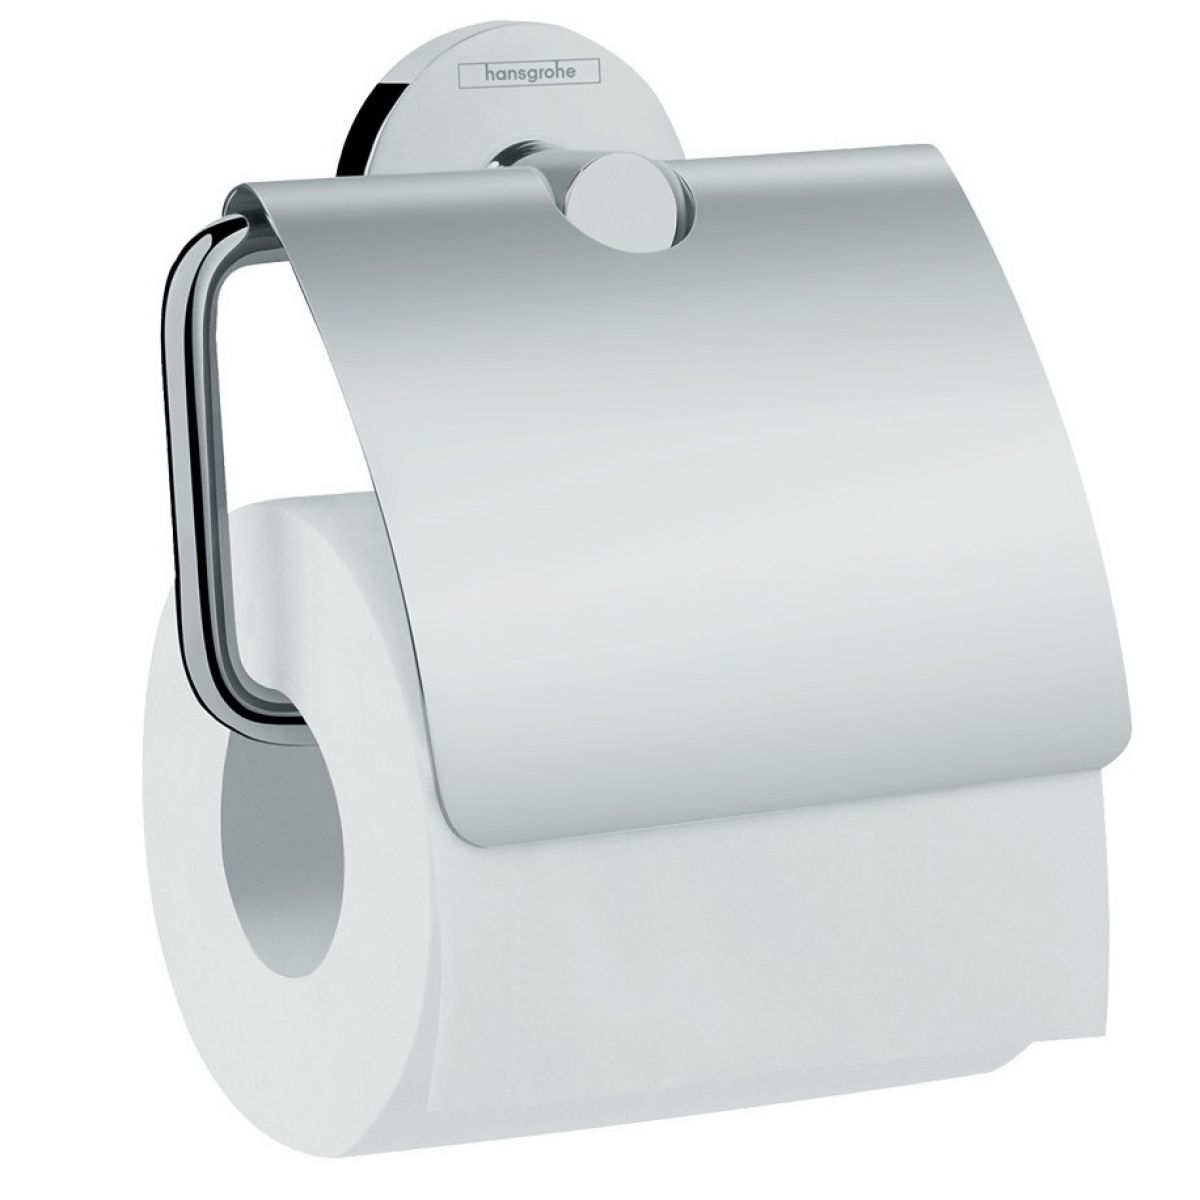 Hansgrohe Logis Universal Toilet Roll Holder with Cover - 41723000